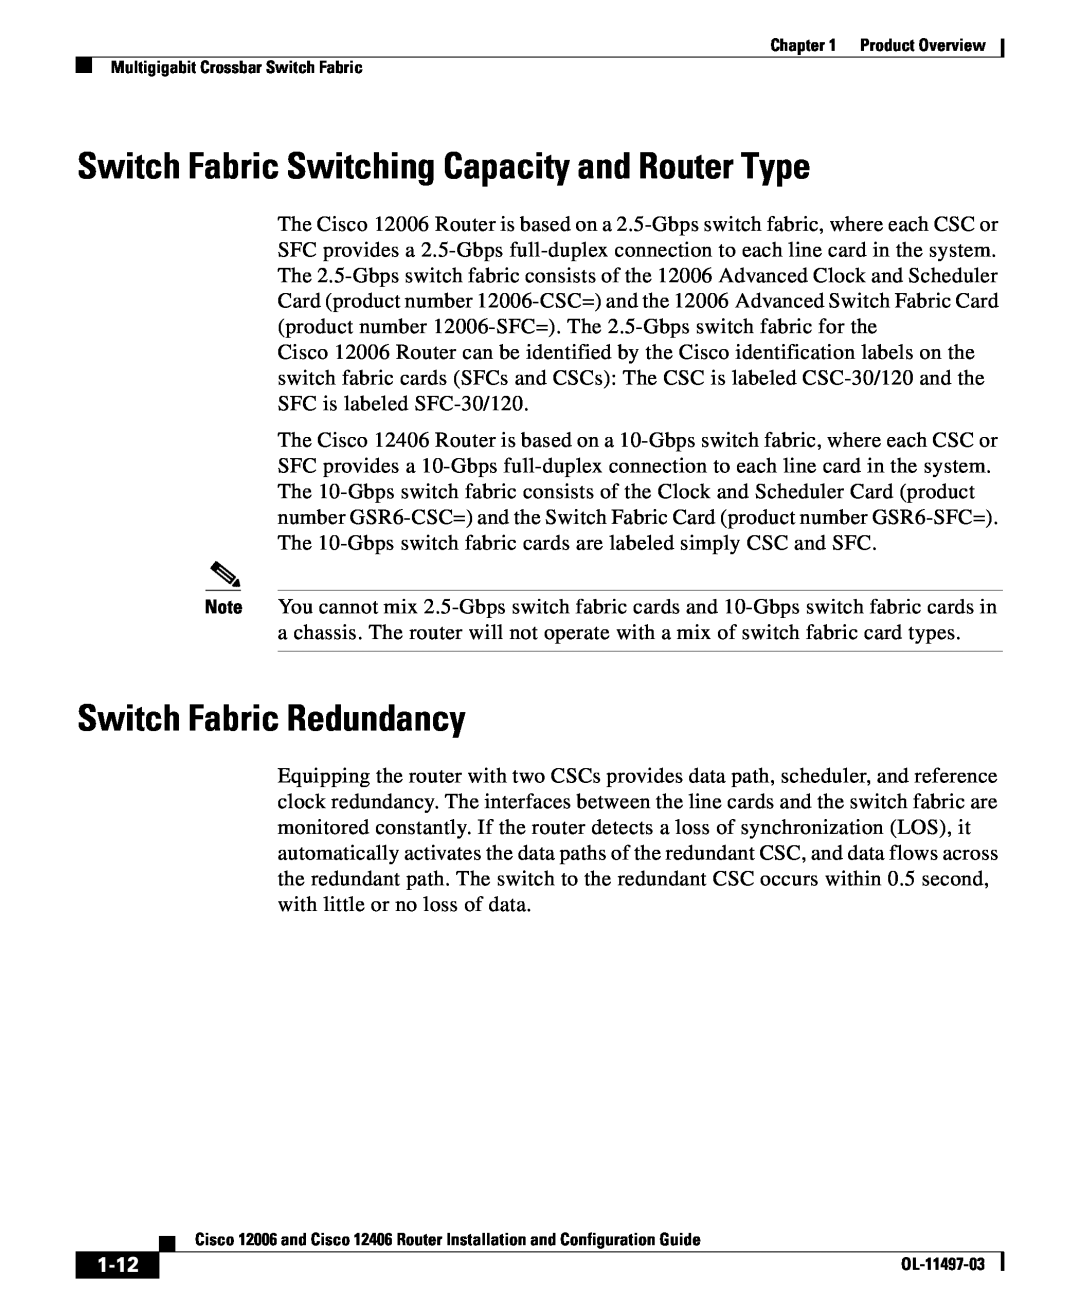 Cisco Systems 12406 series, 12006 series Switch Fabric Switching Capacity and Router Type, Switch Fabric Redundancy, 1-12 